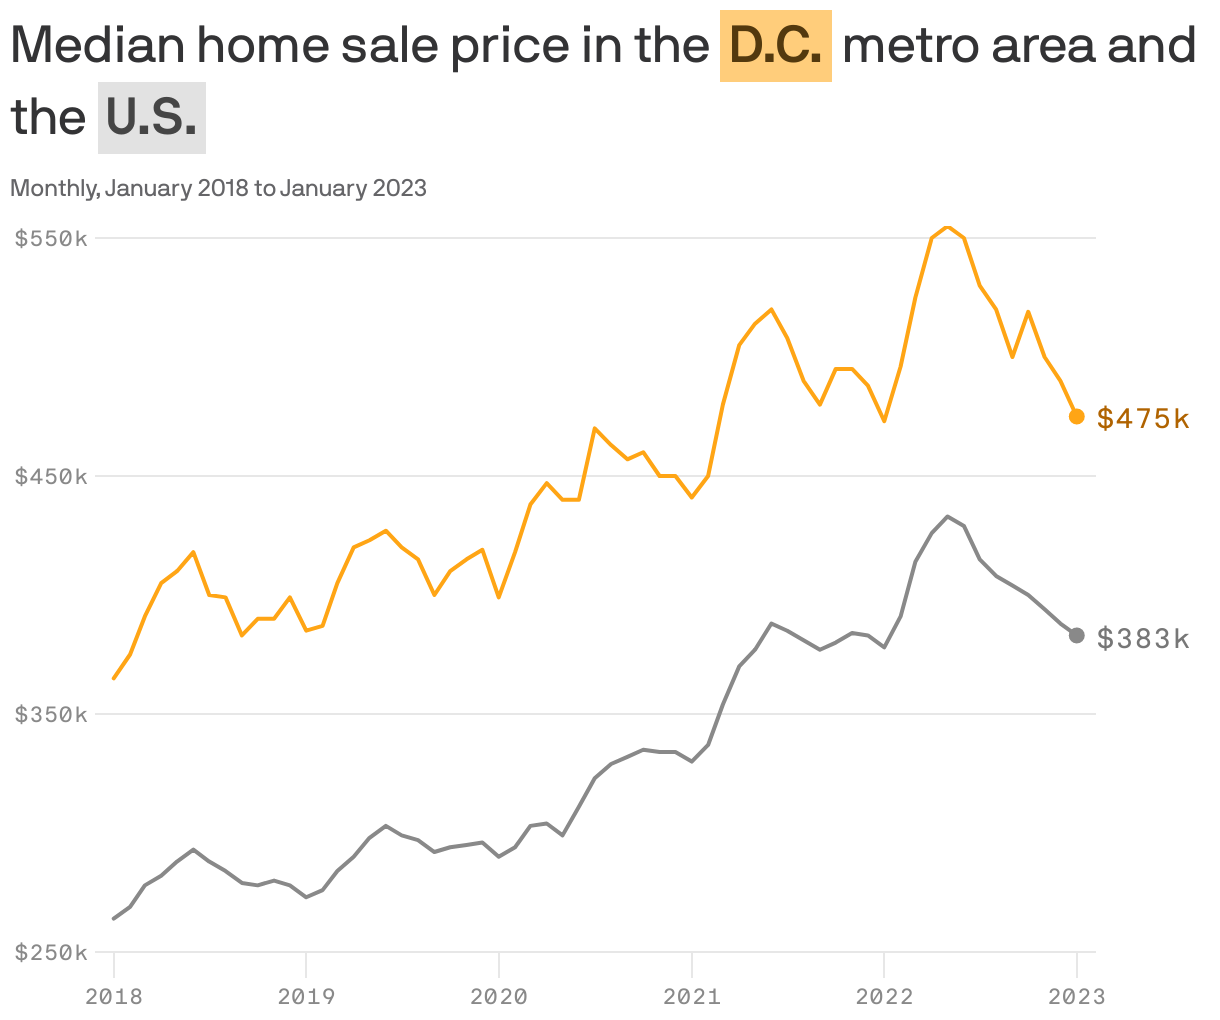 Median home sale price in the <b style='background-color: #FFCD7B; color: #53390E; display: inline-block; padding: 1px 4px; whitespace: no-wrap;'>D.C.</b> metro area and the <b style='background-color: #E2E2E2; color: #454545; display: inline-block; padding: 1px 4px; whitespace: no-wrap;'>U.S.</b>